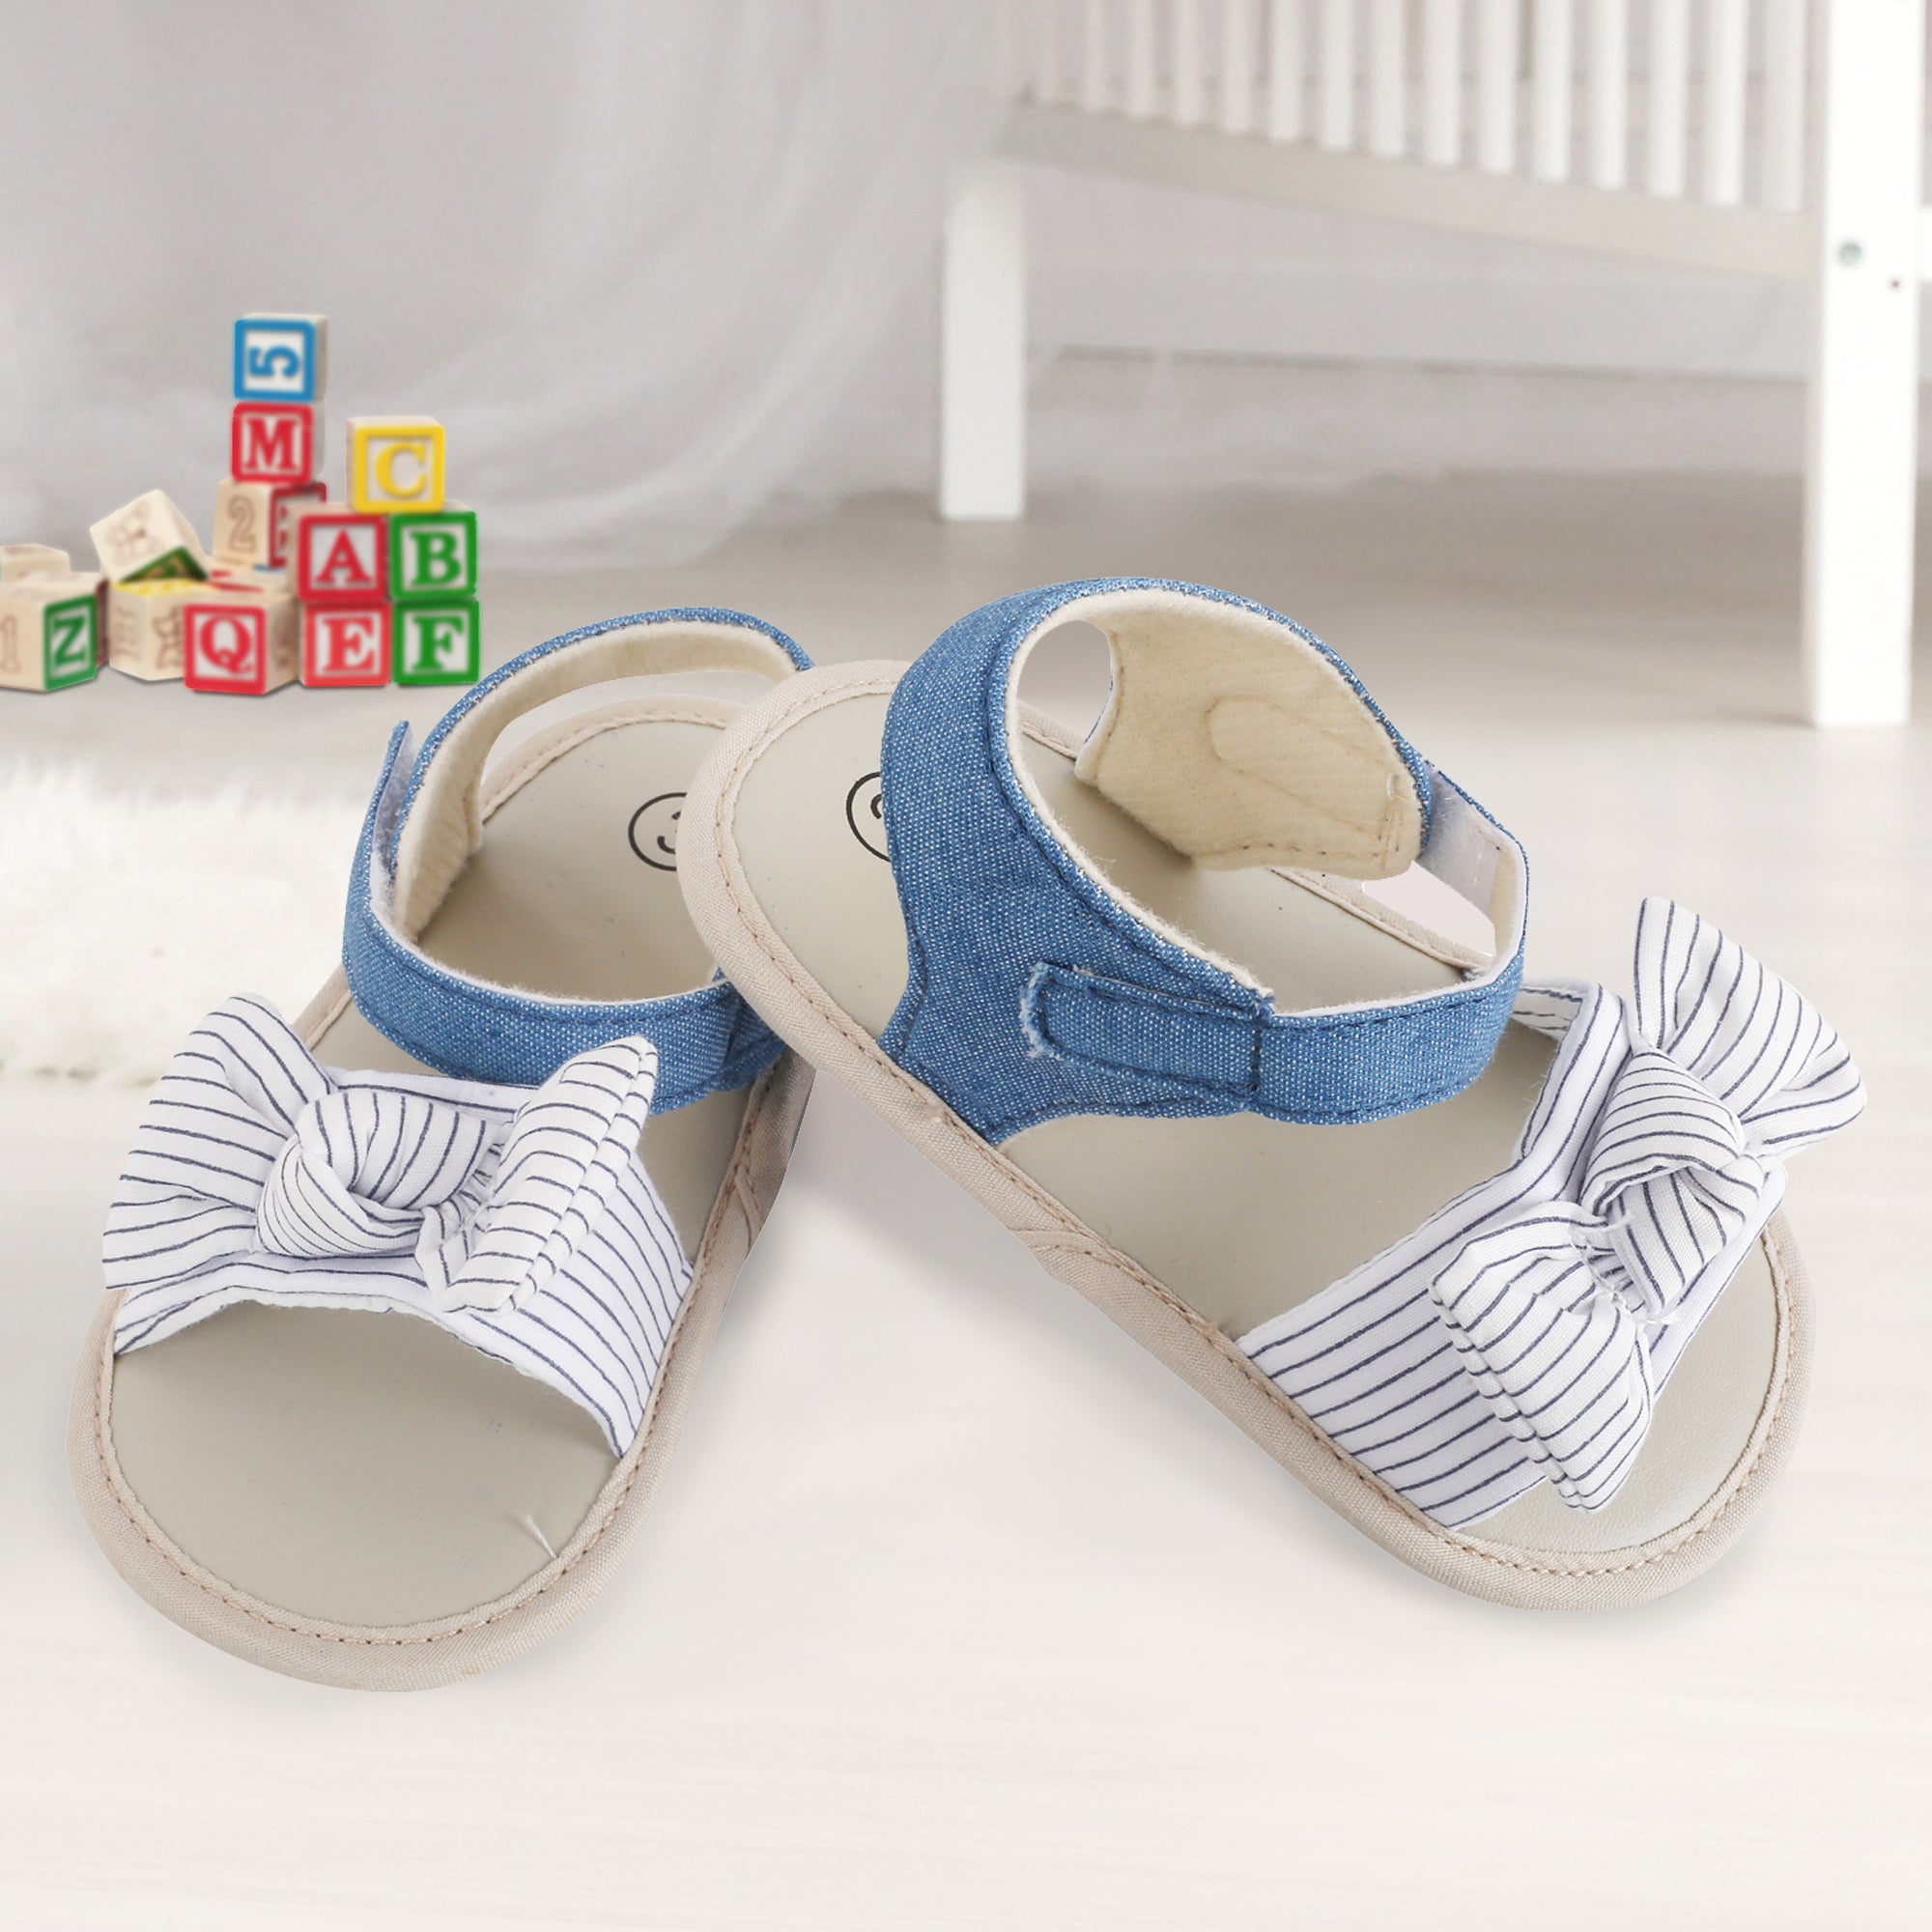 Baby Moo Striped Blue Booties - Baby Moo